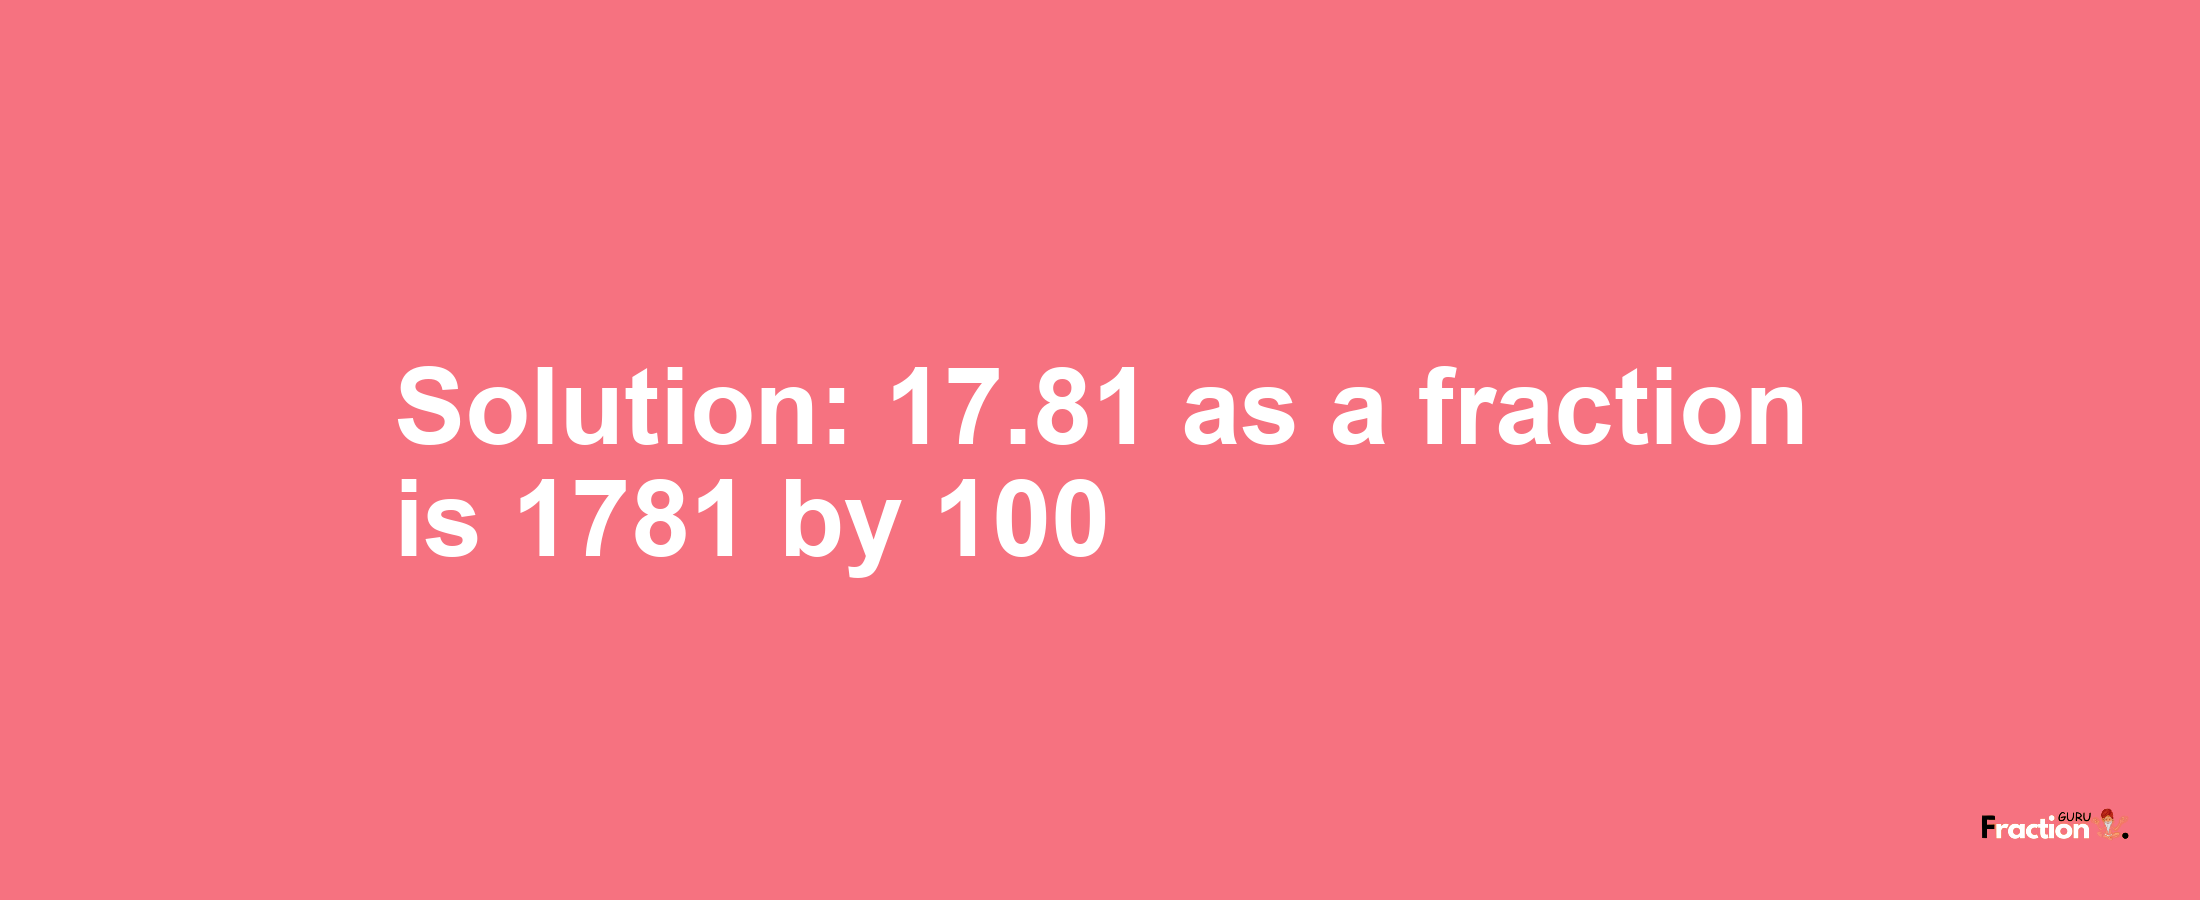 Solution:17.81 as a fraction is 1781/100